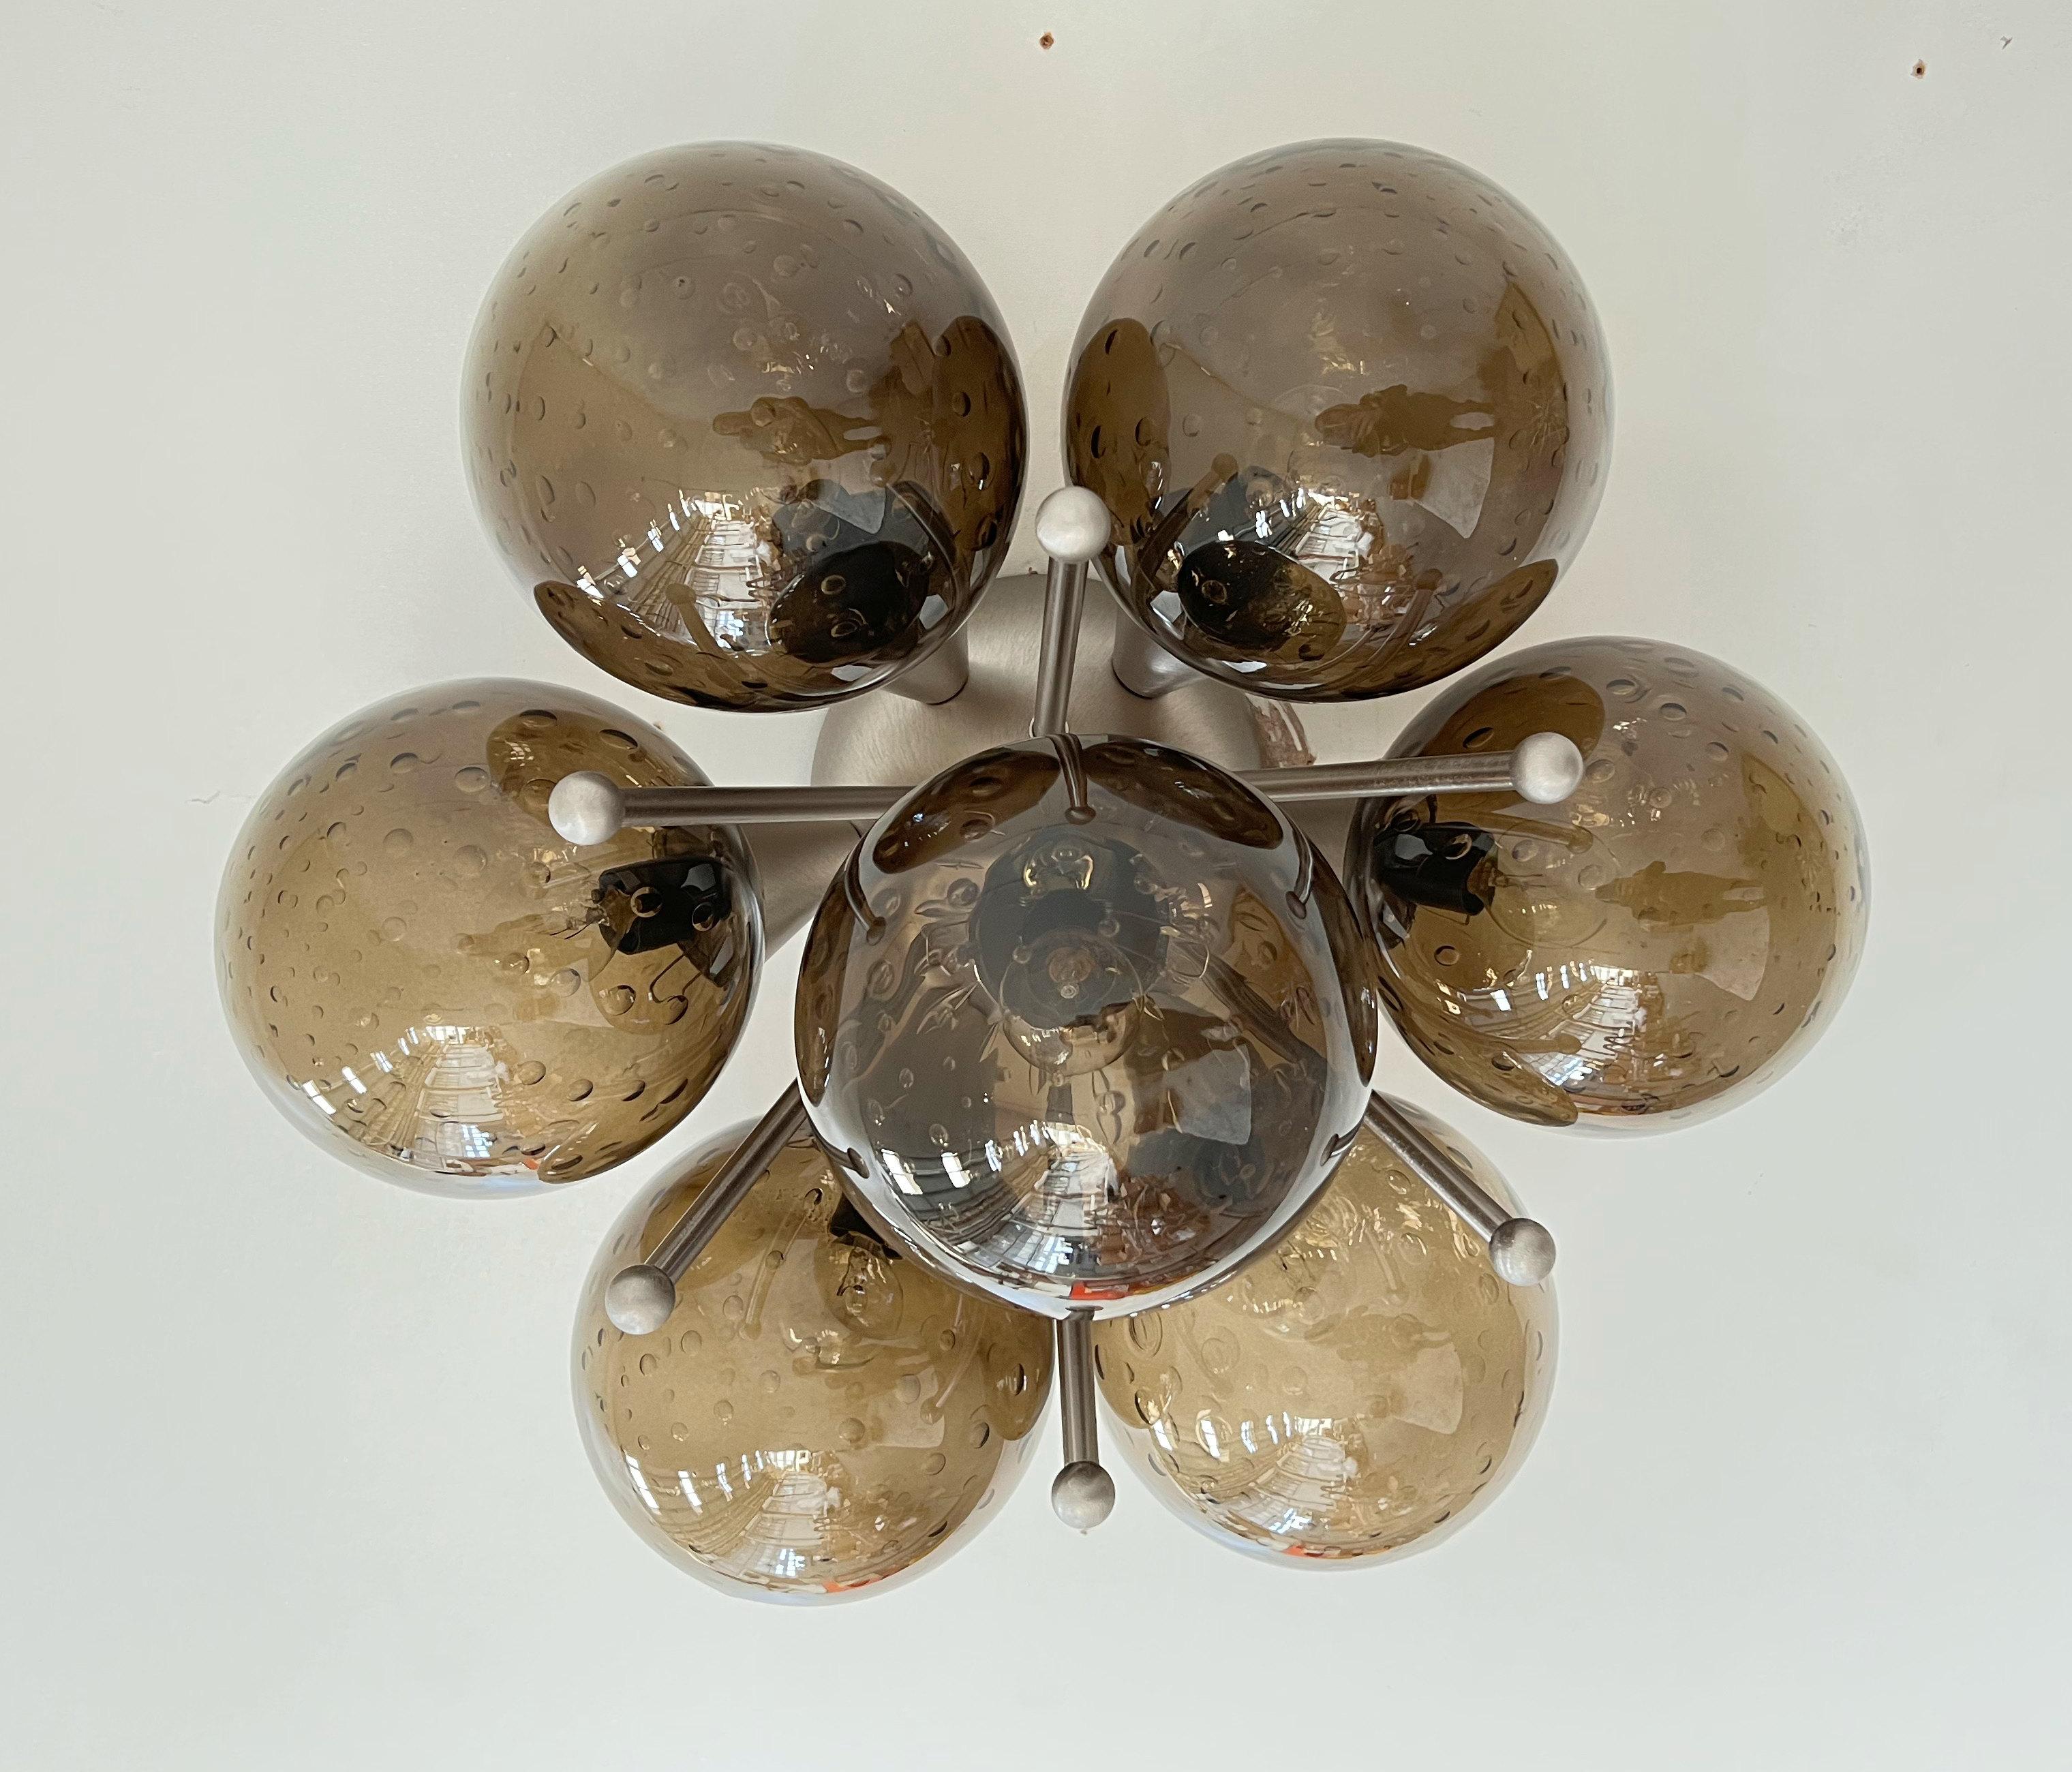 Italian flush mount with Murano glass globes mounted on solid brass frame
Designed by Fabio Bergomi / Made in Italy
7 lights / E12 or E14 type / max 40W each
Diameter: 22 inches / Height: 11 inches
Order only / This item ships from Italy
Order